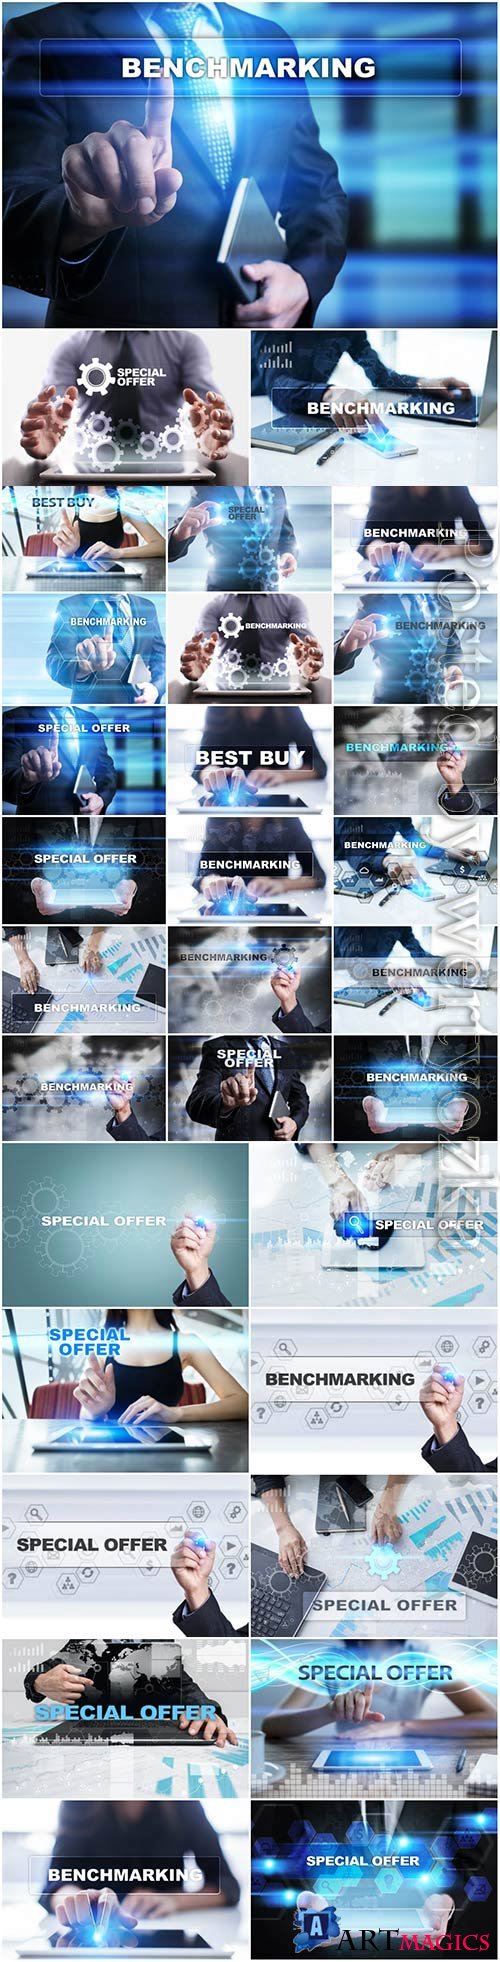 Modern technology and business concept stock photo